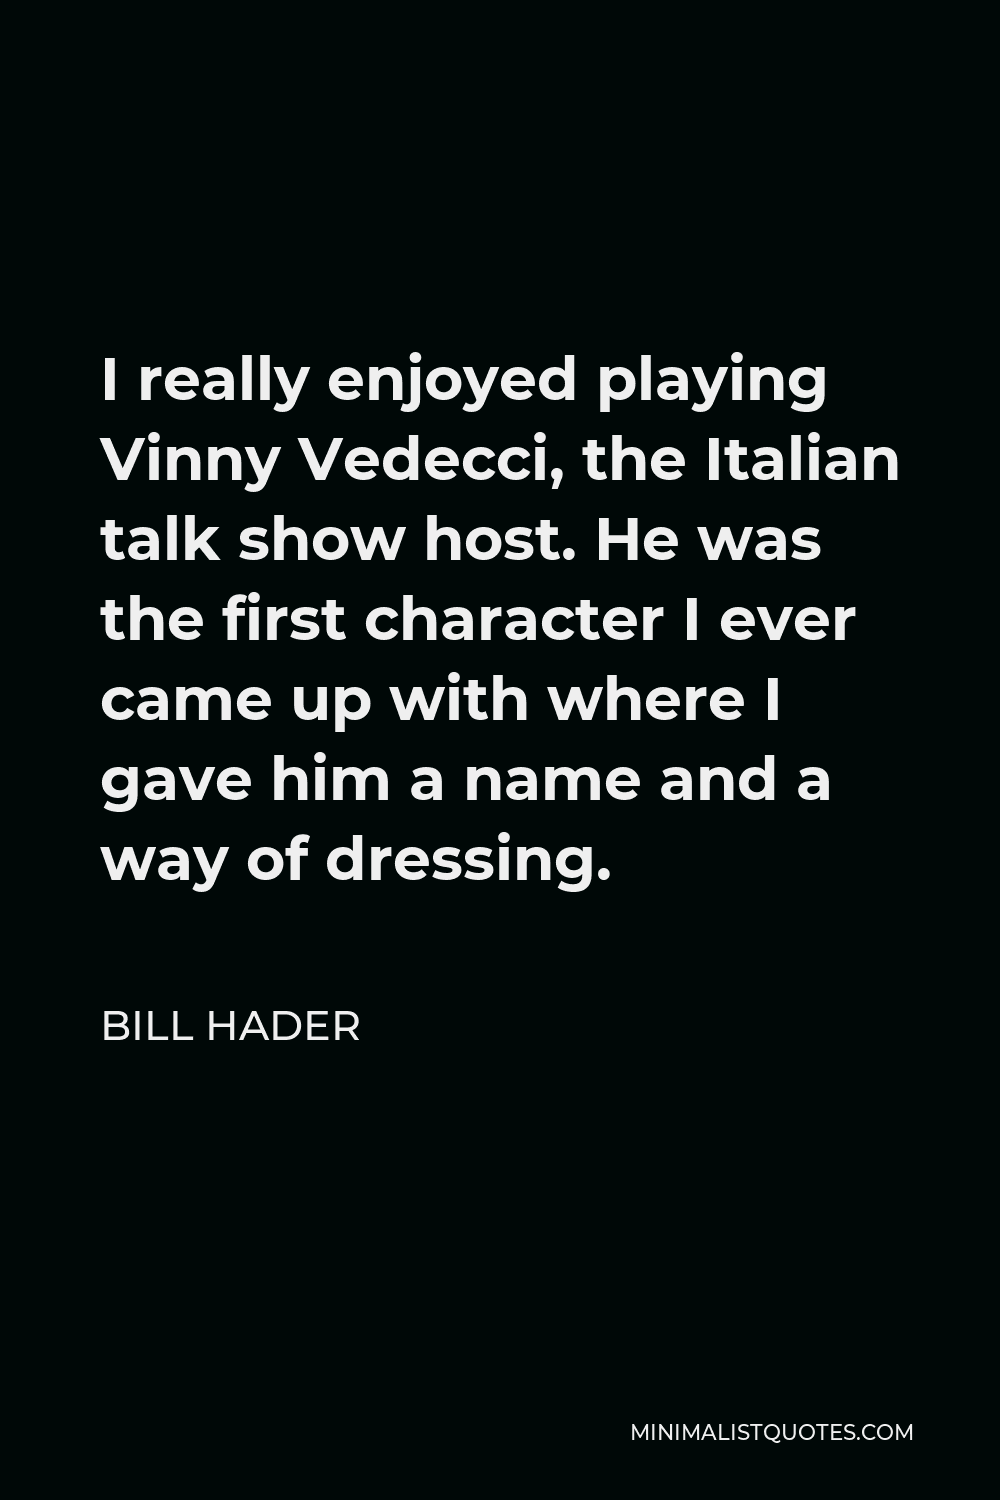 Bill Hader Quote - I really enjoyed playing Vinny Vedecci, the Italian talk show host. He was the first character I ever came up with where I gave him a name and a way of dressing.